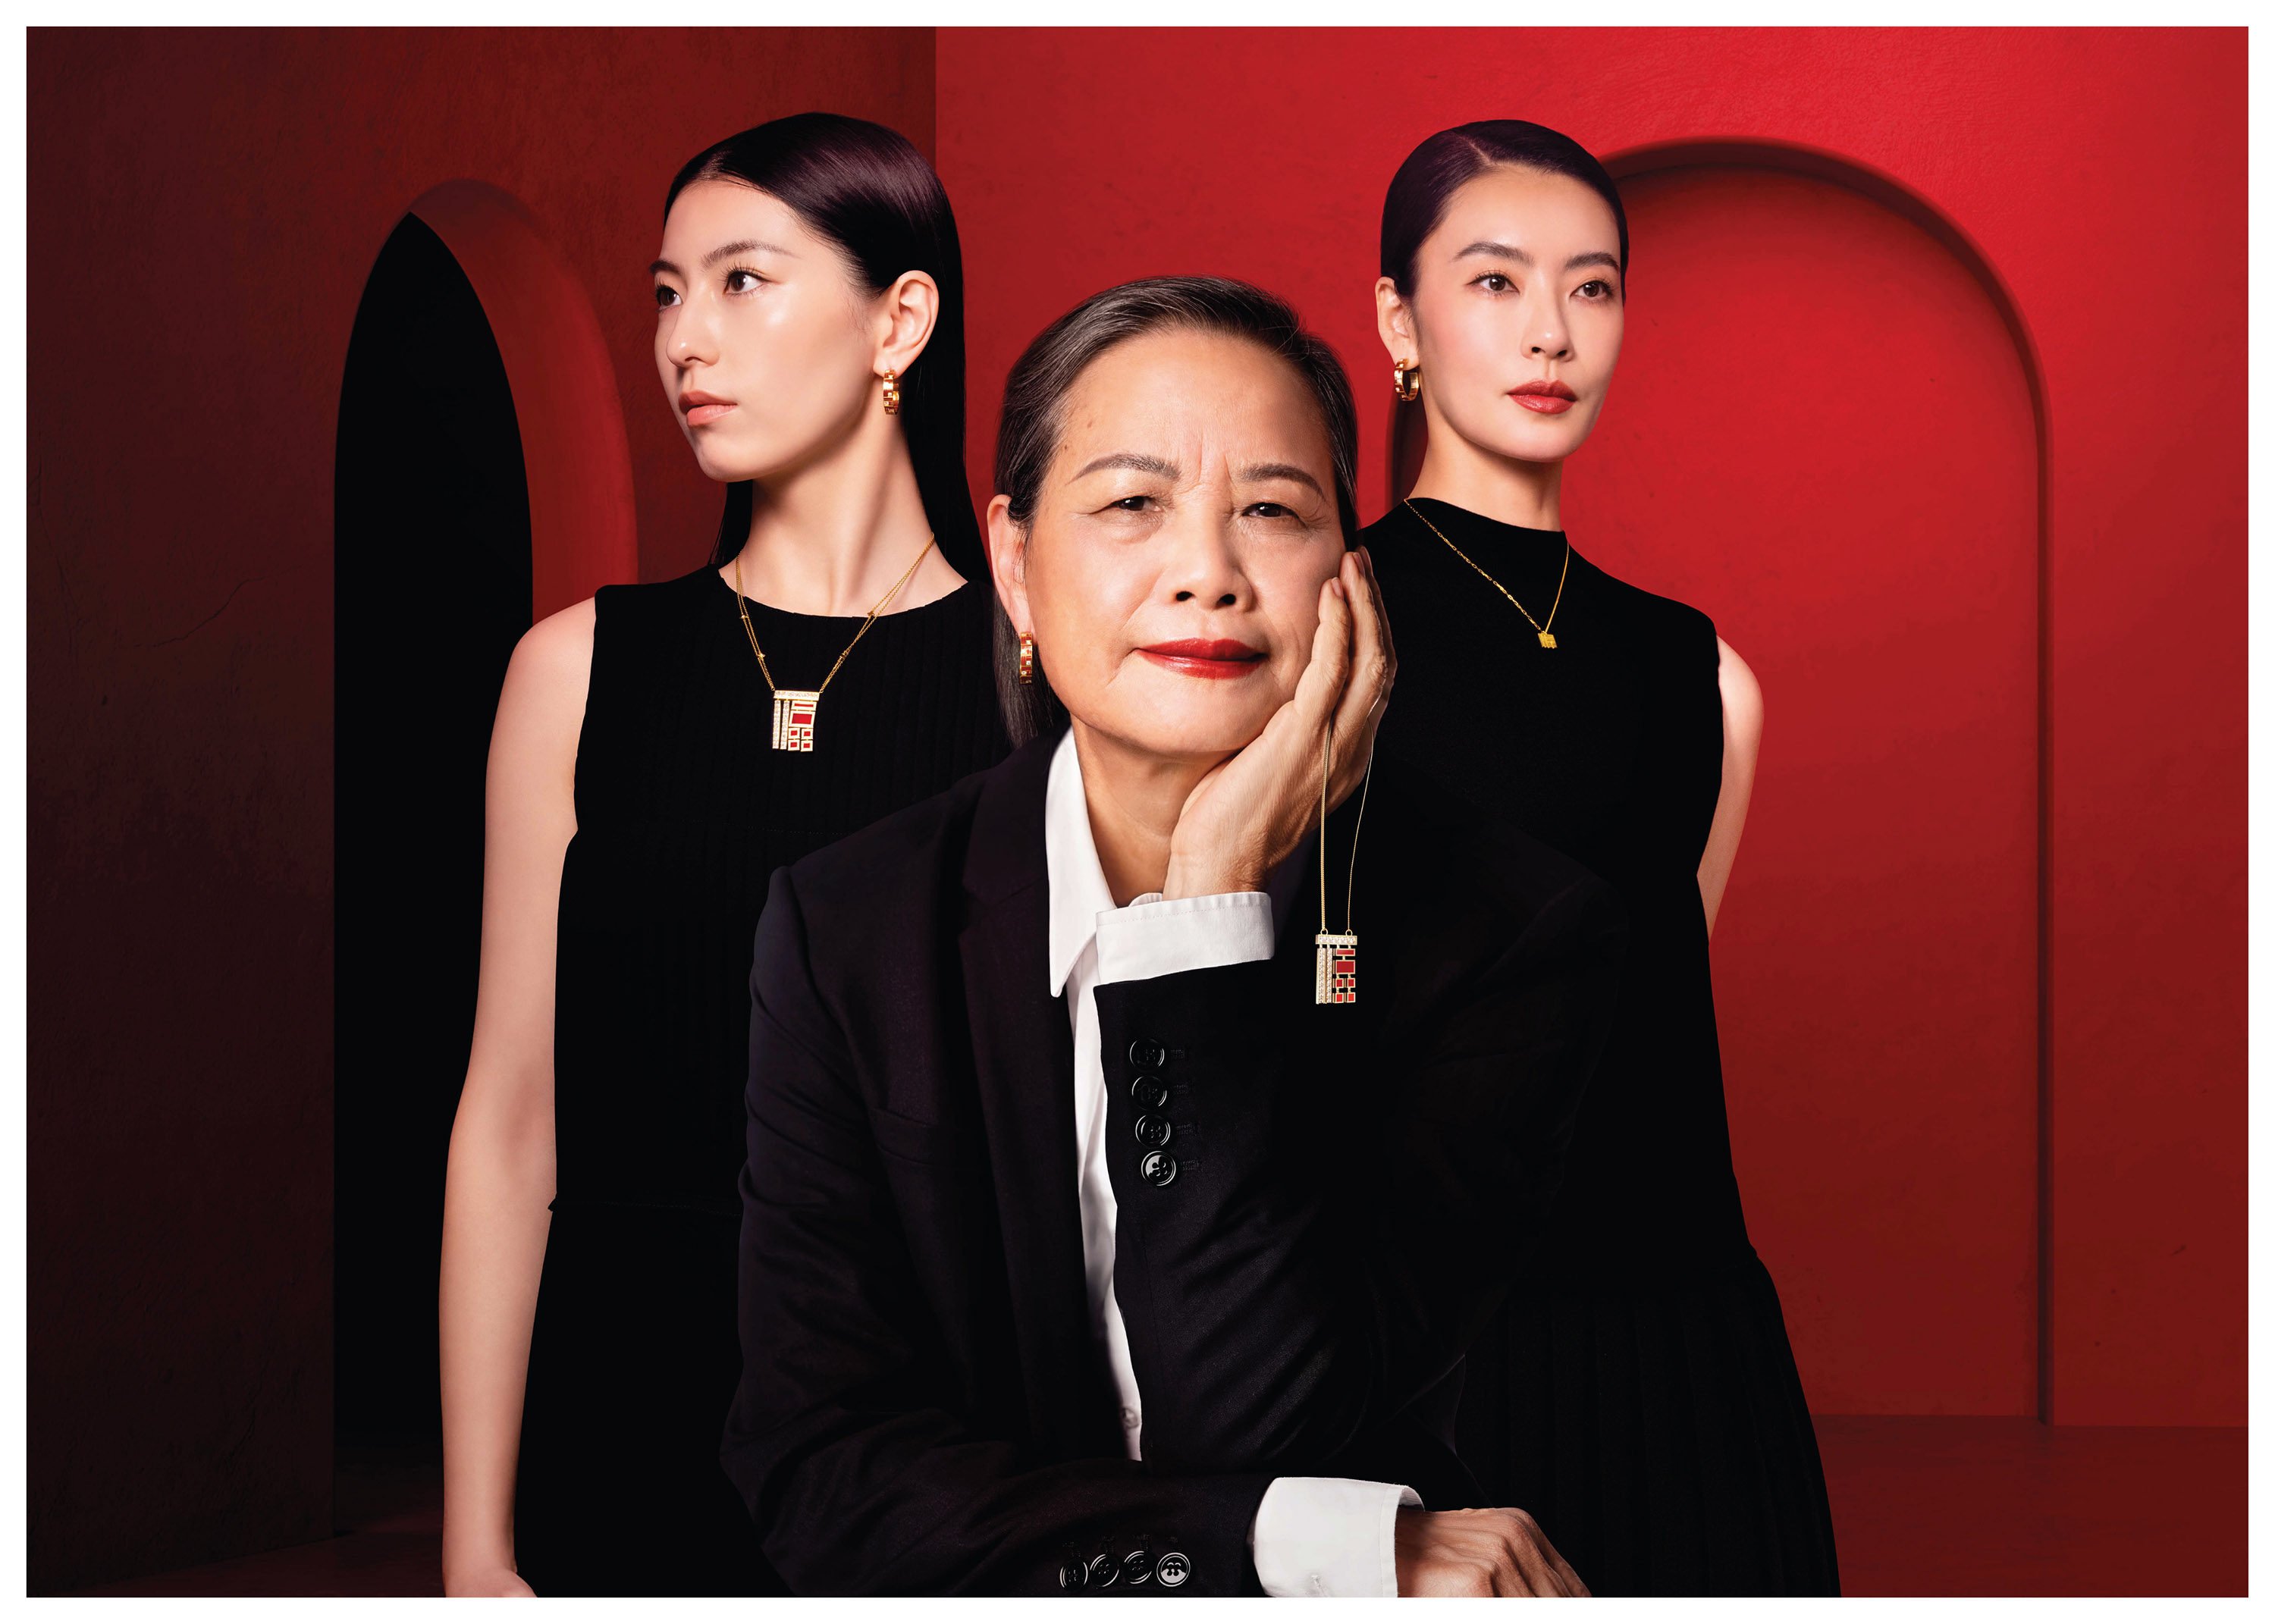 Hong Kong jewellery brand Chow Tai Fook is celebrating its 95th anniversary with the Rouge collection. Photo: Handout